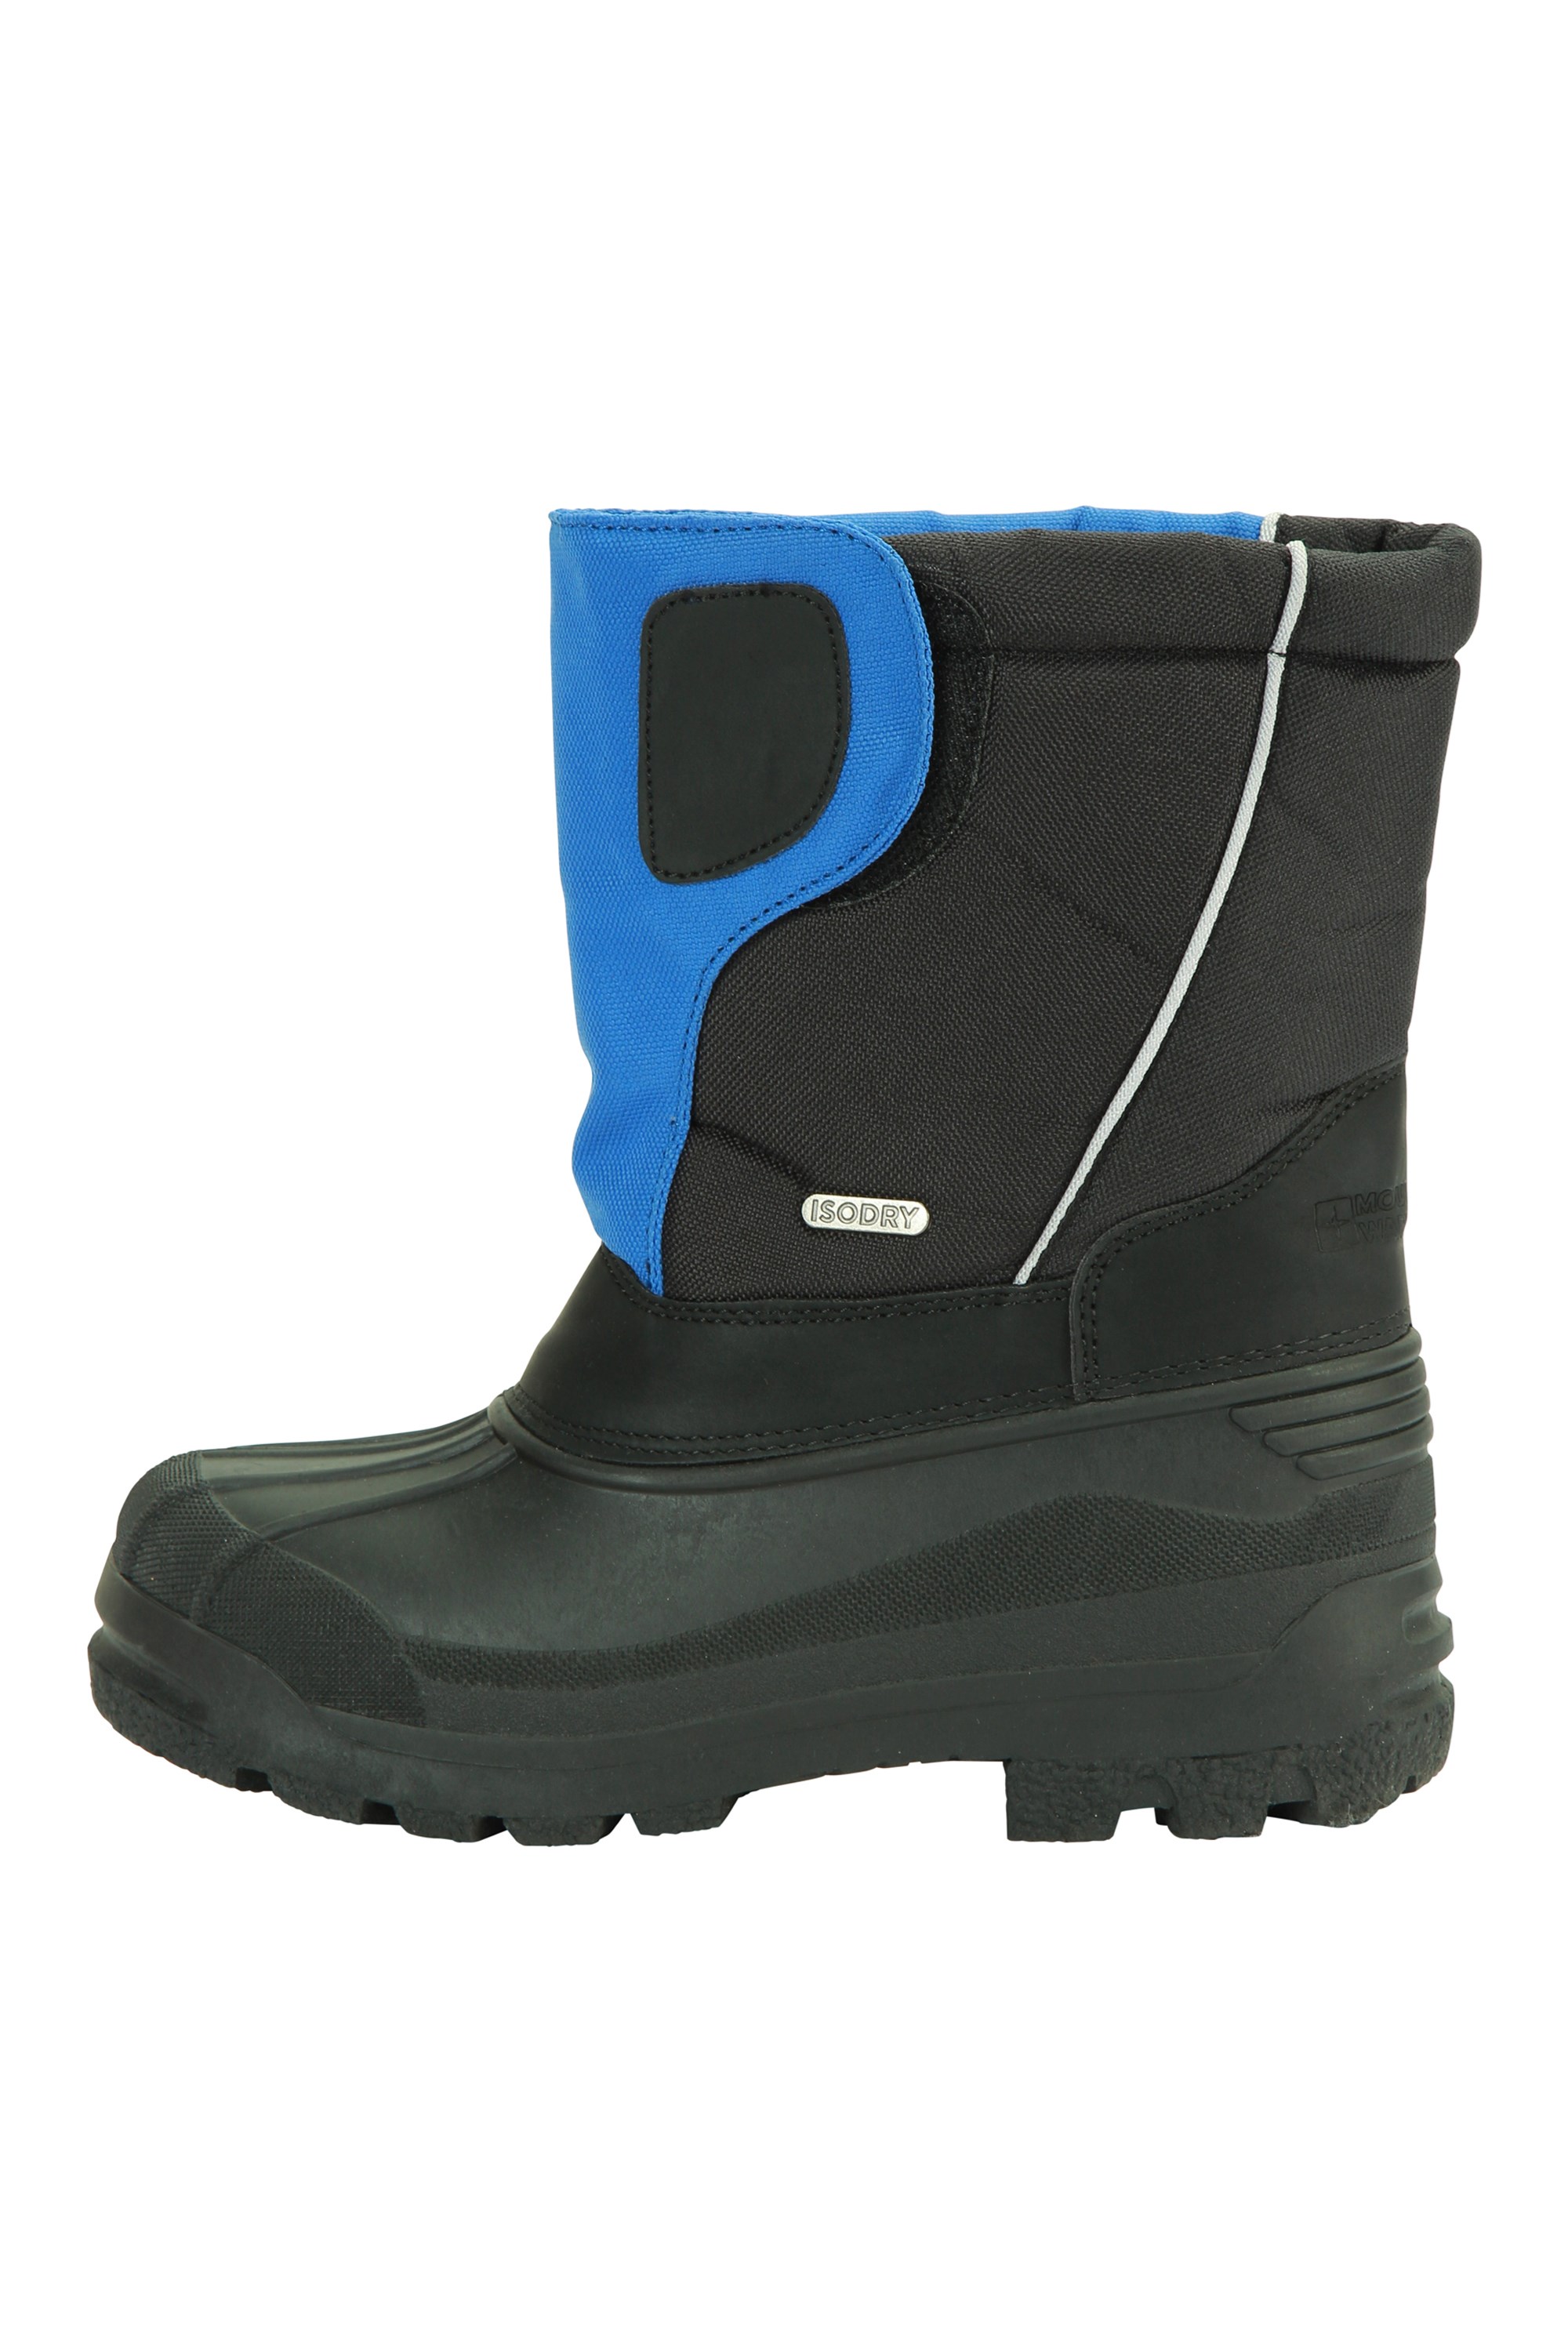 thinsulate kids boots